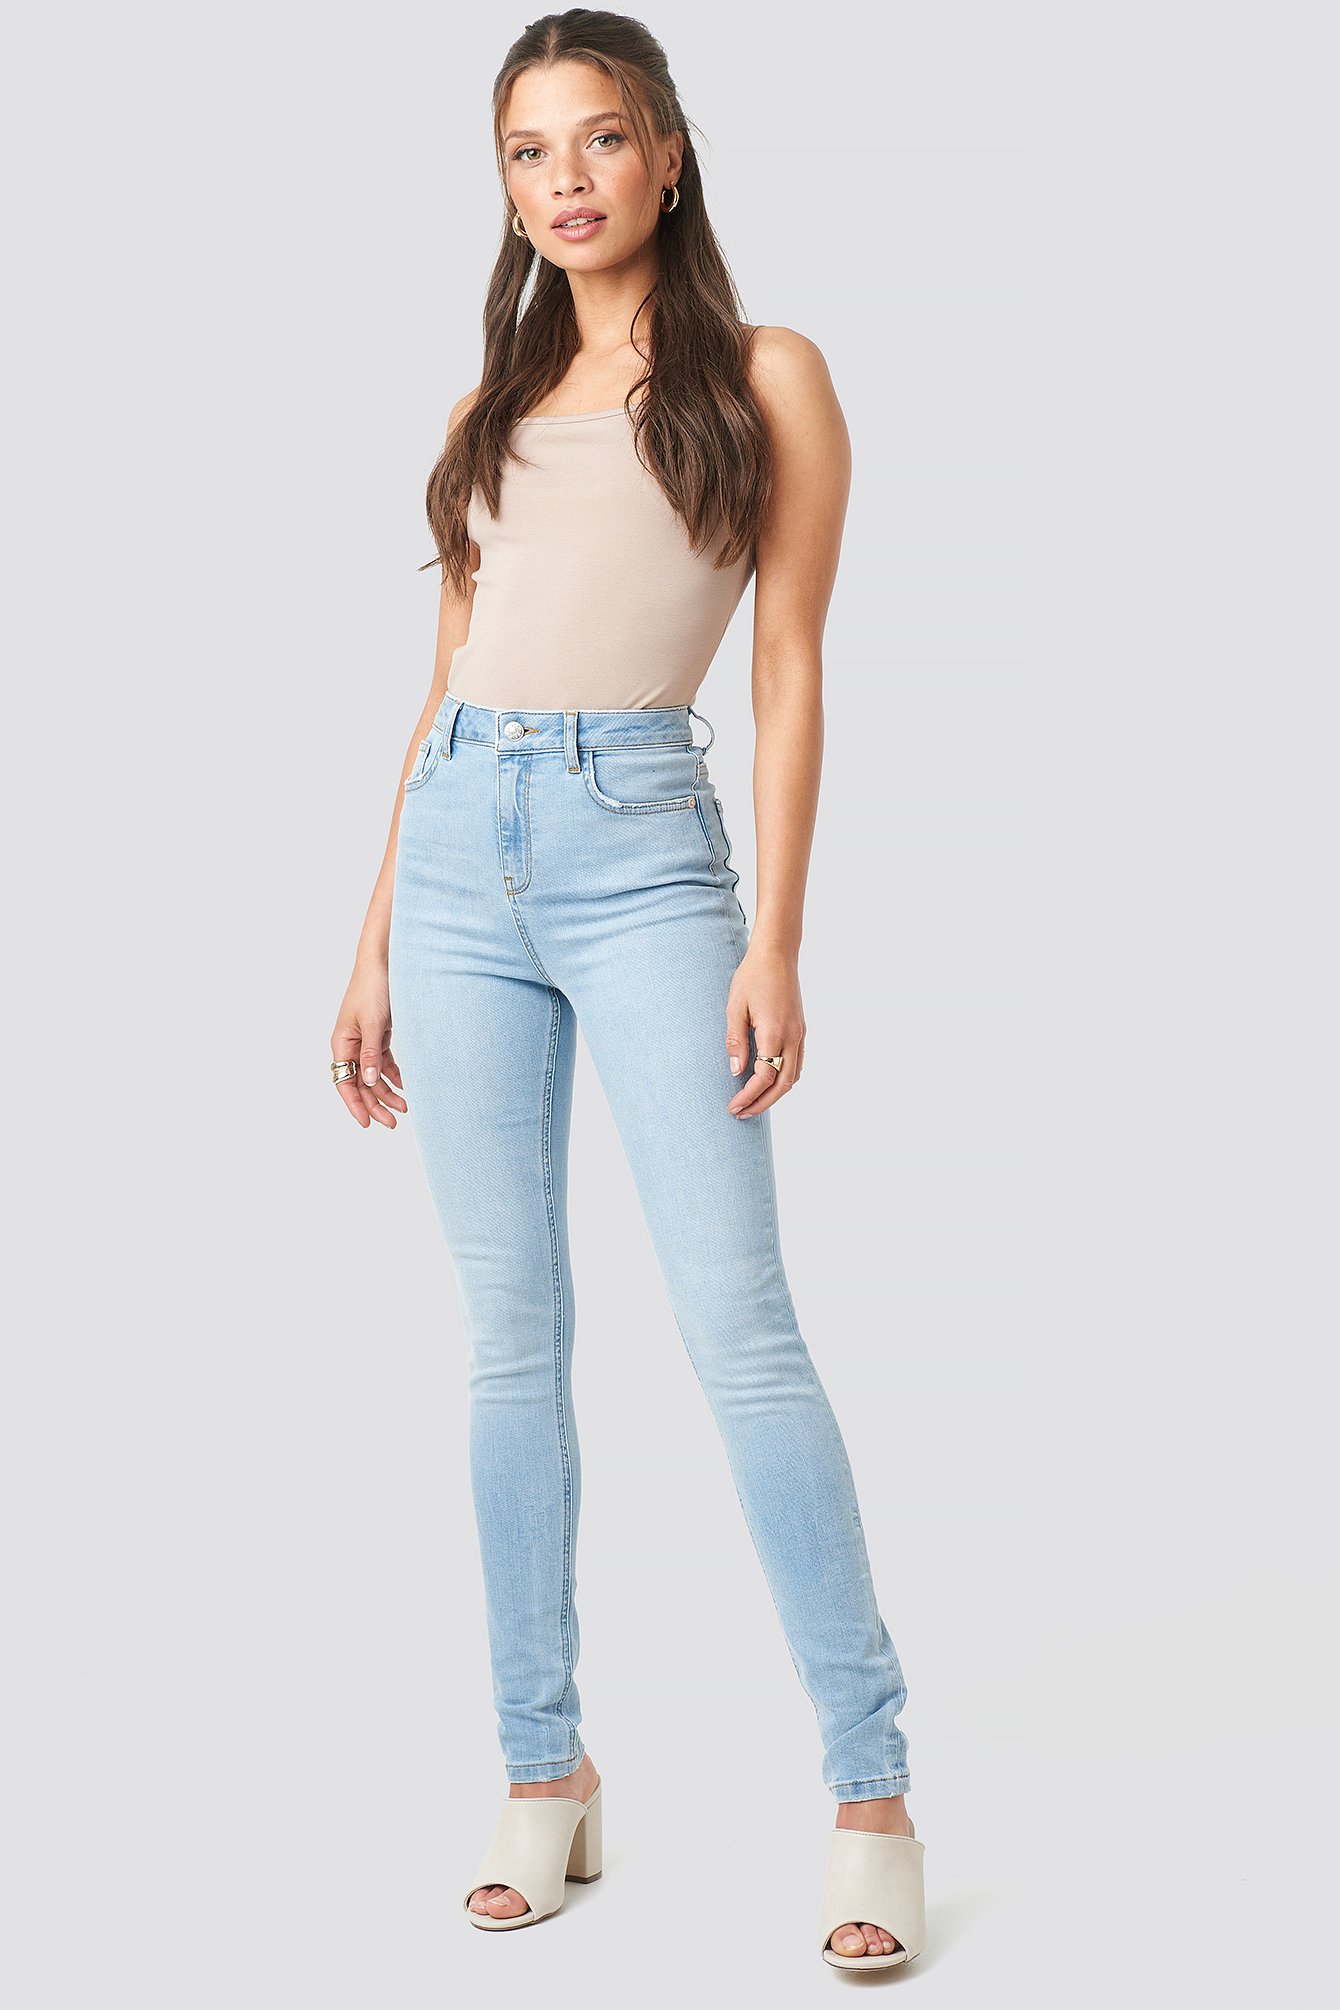 cheap high waisted skinny jeans